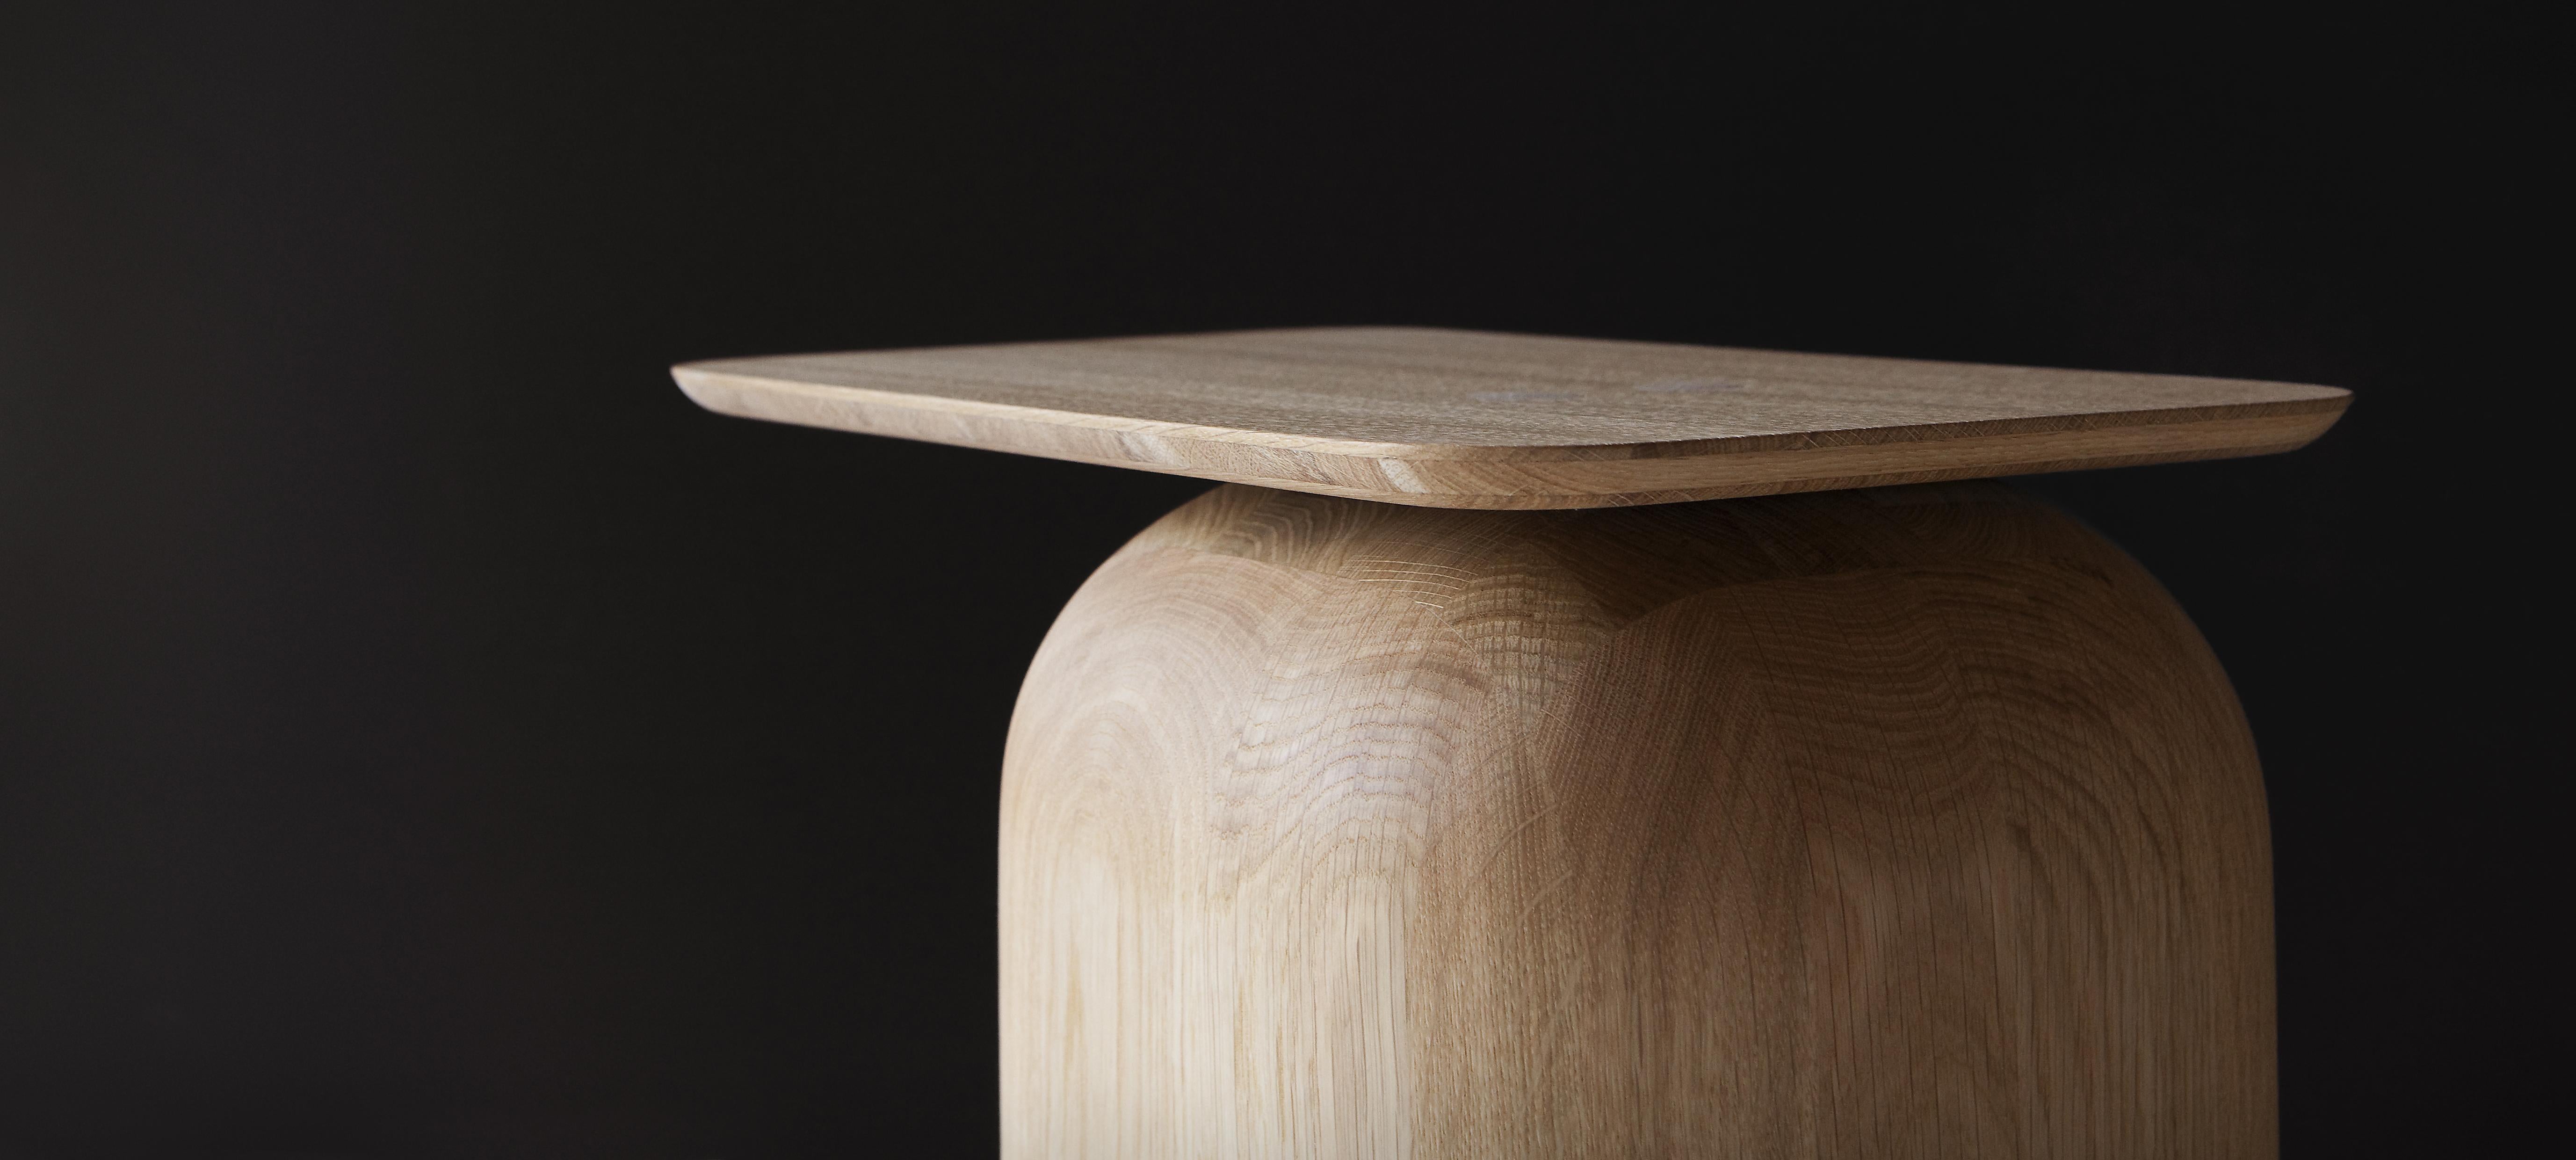 The April table set was designed by Swiss designer Alfredo Häberli in 2012. The massive wooden base is harmoniously combined with the tabletop by traditional wooden joinery. 

The tables are made of different wood species: birch, ash, and oak.